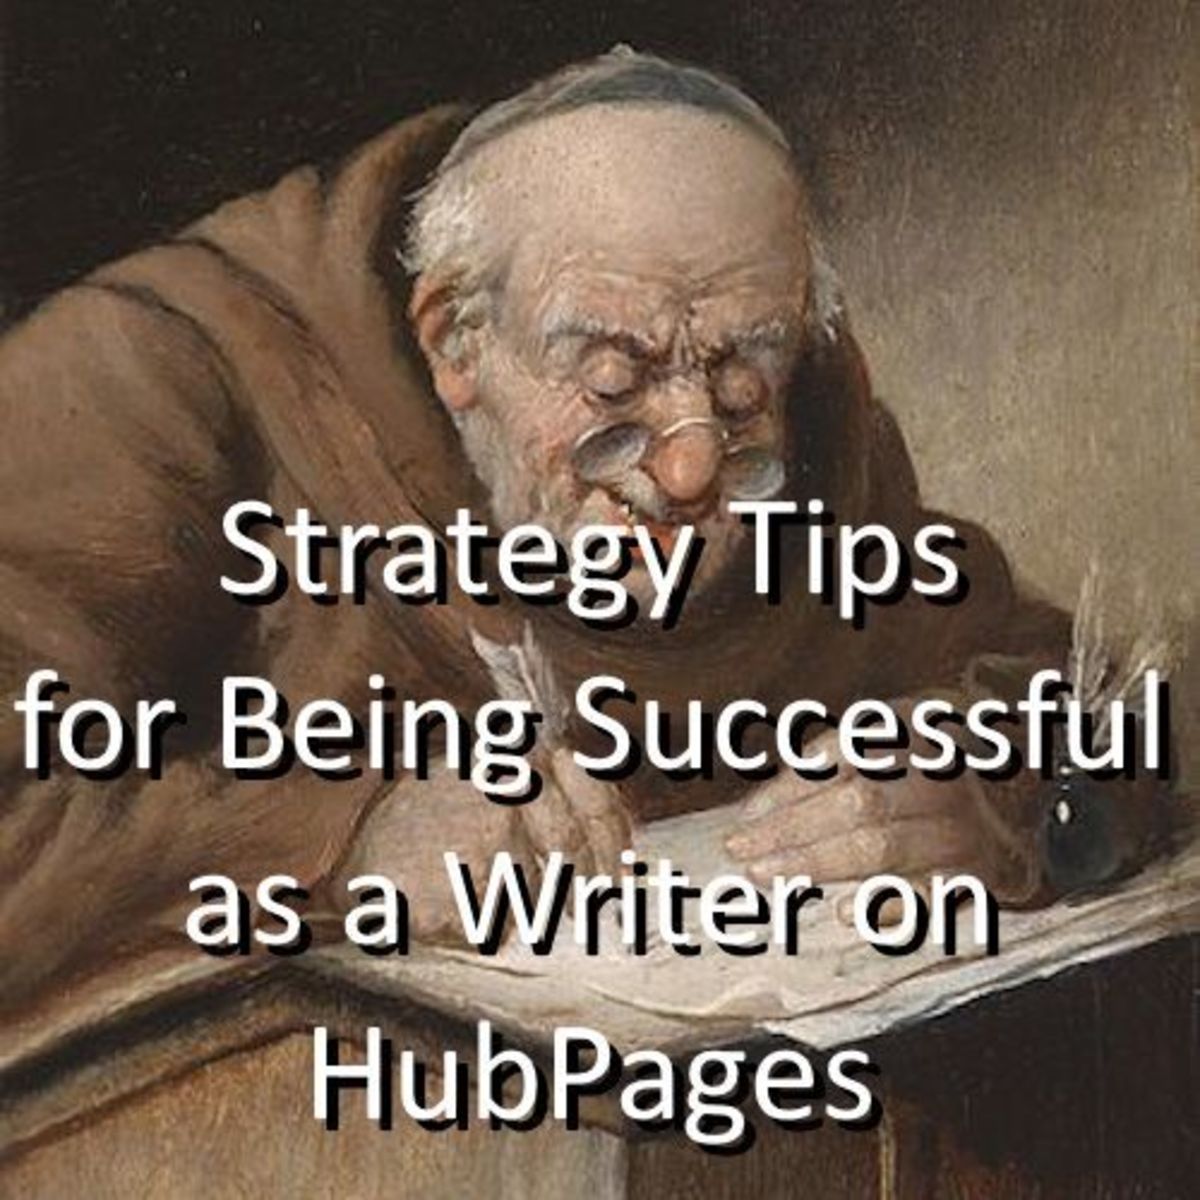 hubpages-strategy-tips